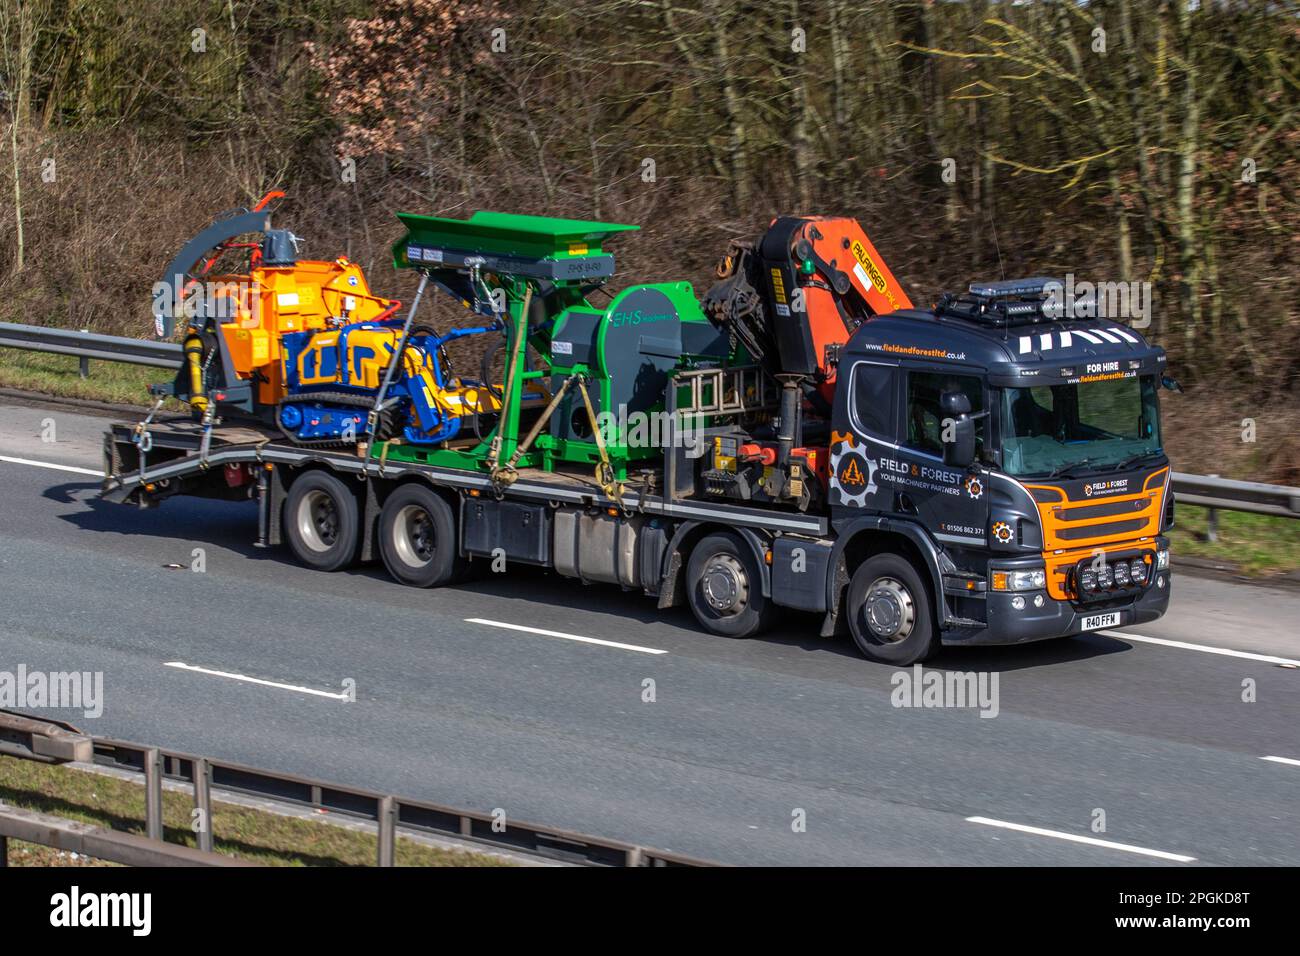 Fields & Forests, agricultural, horticultural, & forestry business. Gardening heavy duty machinery, PALFINGER HIAB Lorry Crane, JENSEN FLAIL BOT, Excavator Mulcher Jansen BM-120, Hydraulic, Mini Excavator, Flail Mower. EHS wood chipper machine; travelling on the M6 motorway UK Stock Photo